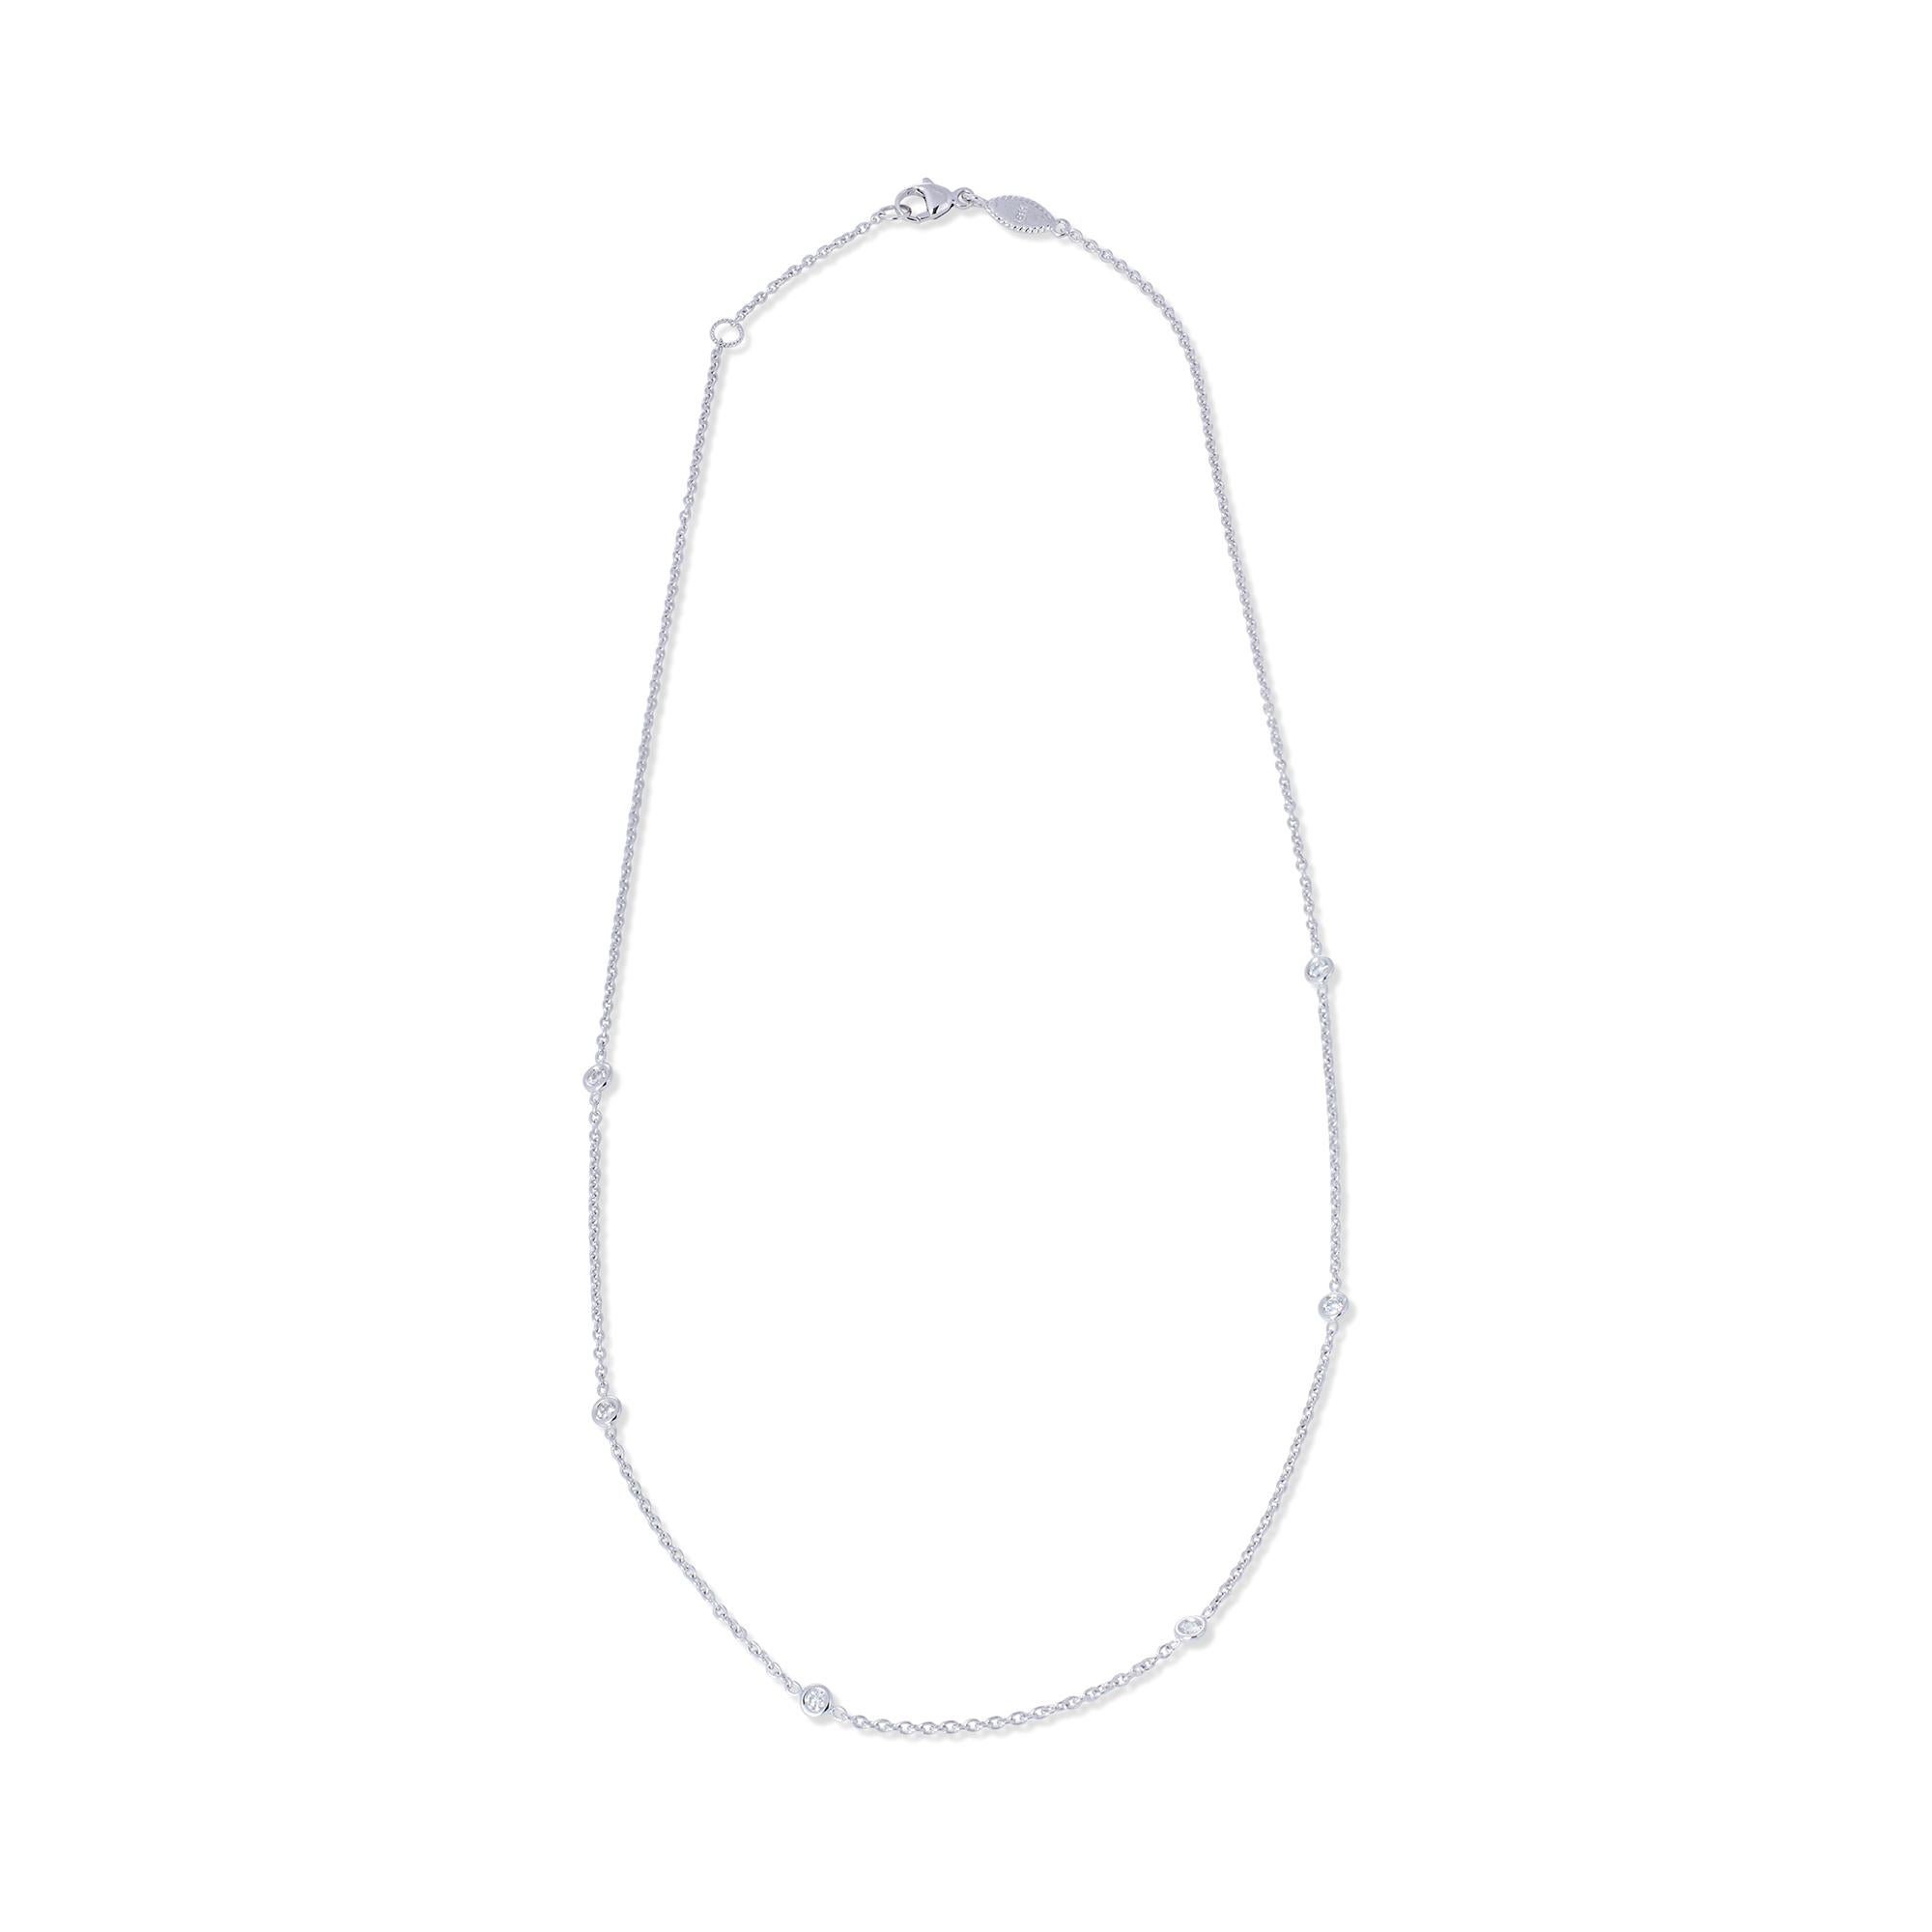 Contemporary Penny Preville White Gold and Diamond Station Necklace